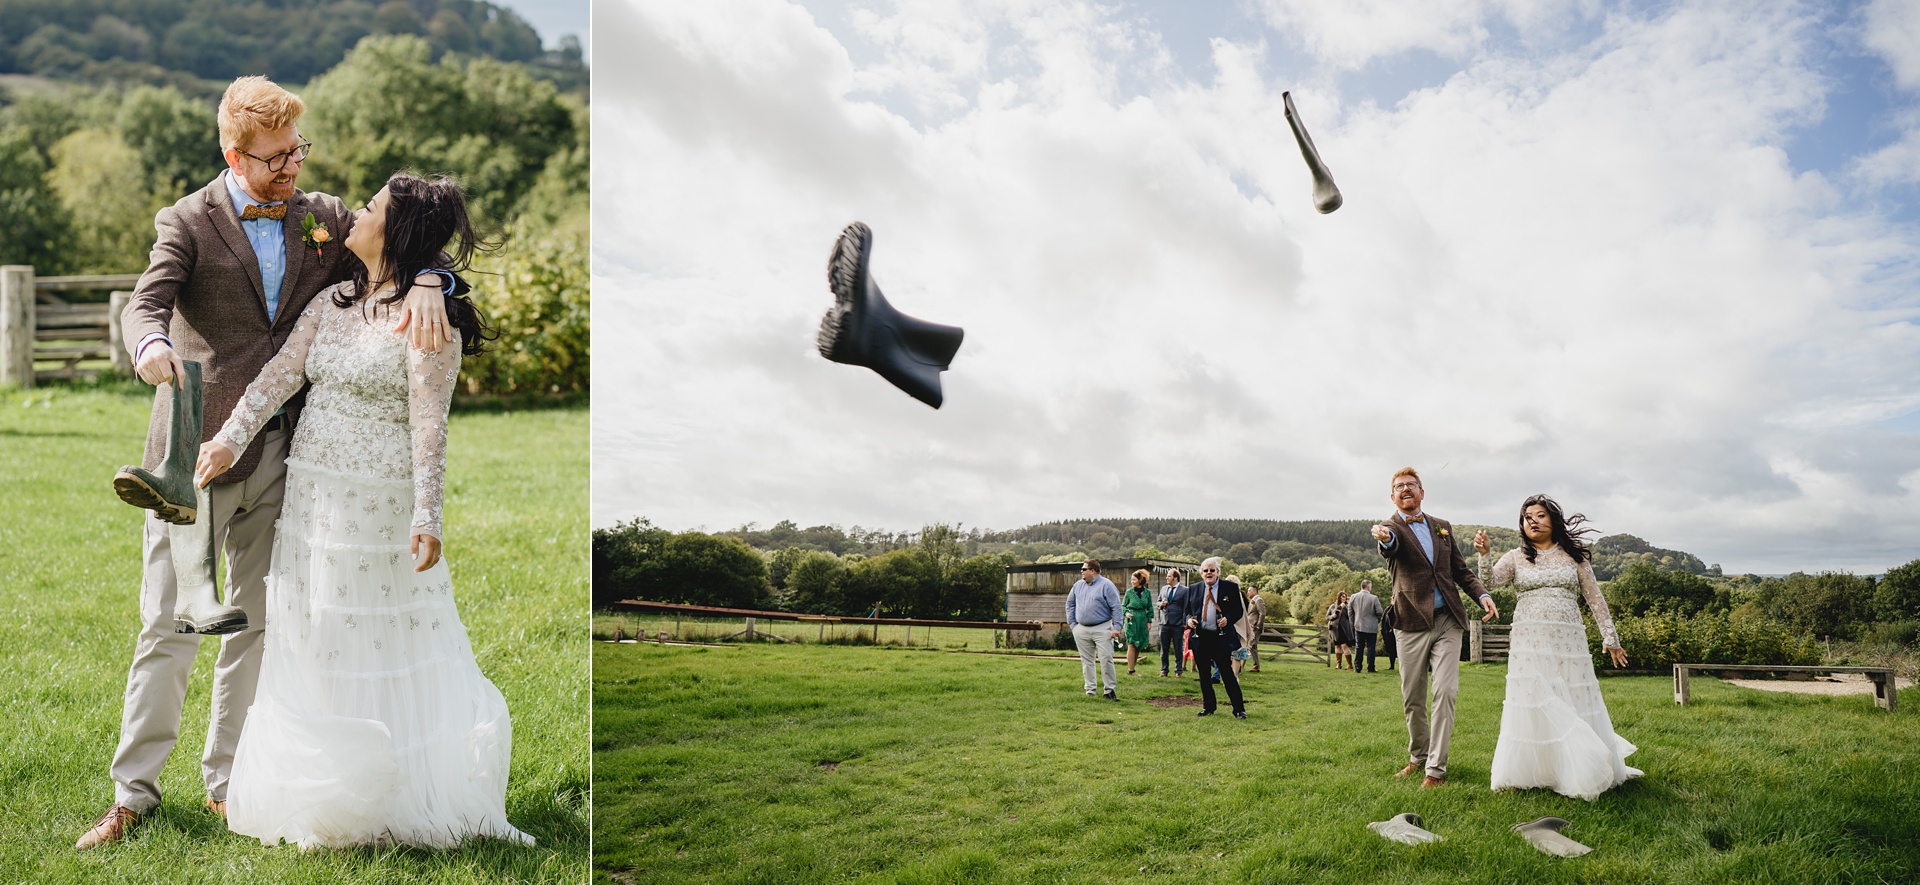 bride and groom throwing wellies across a field